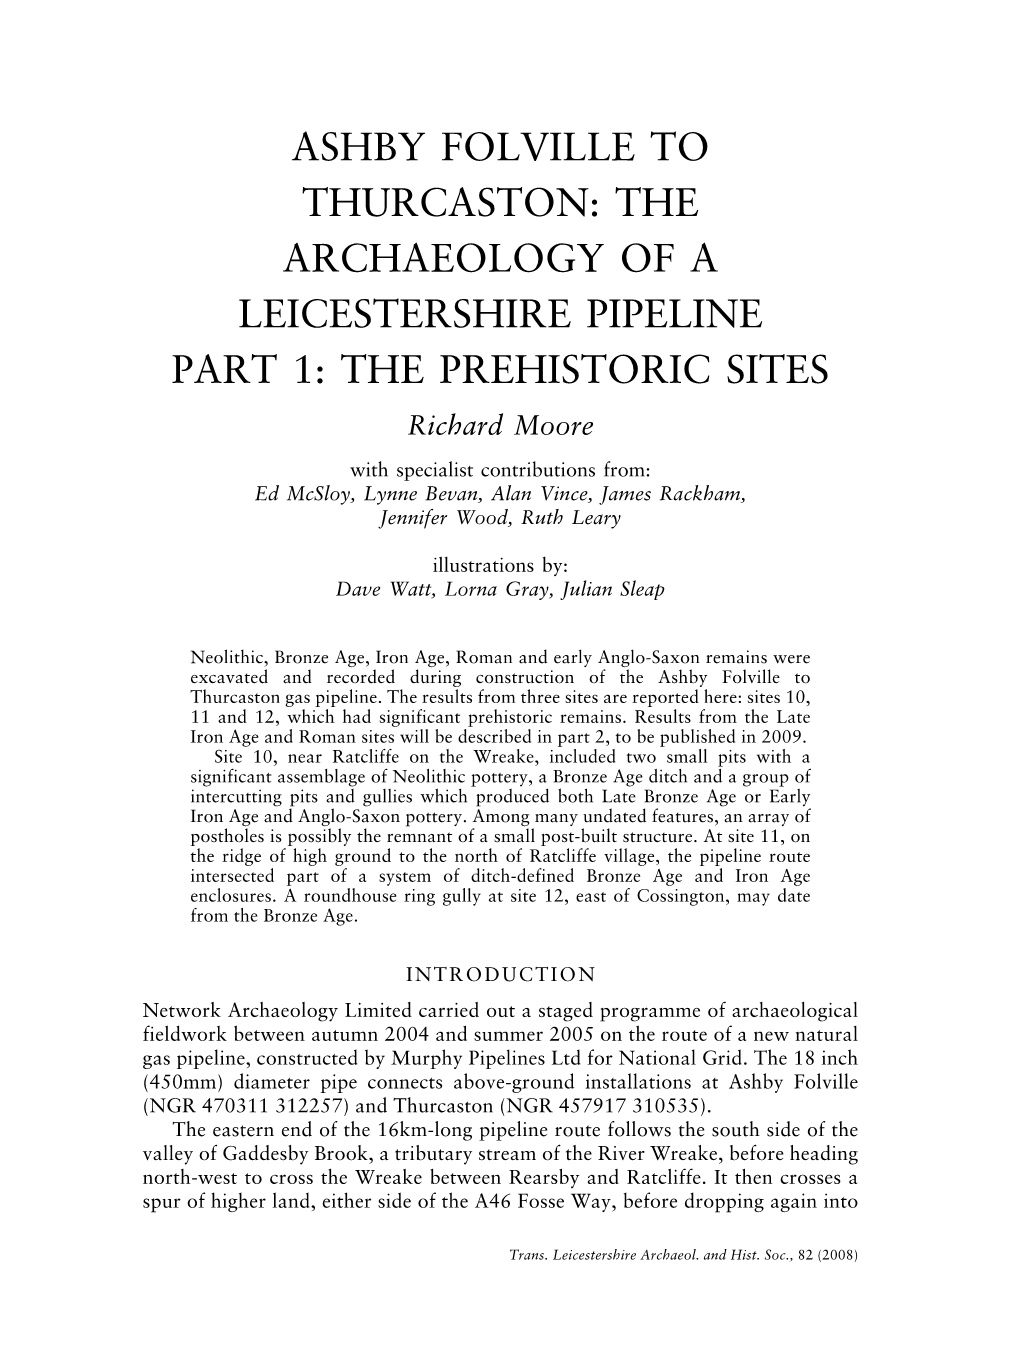 ASHBY FOLVILLE to THURCASTON: the ARCHAEOLOGY of a LEICESTERSHIRE PIPELINE PART 1: the PREHISTORIC SITES Richard Moore